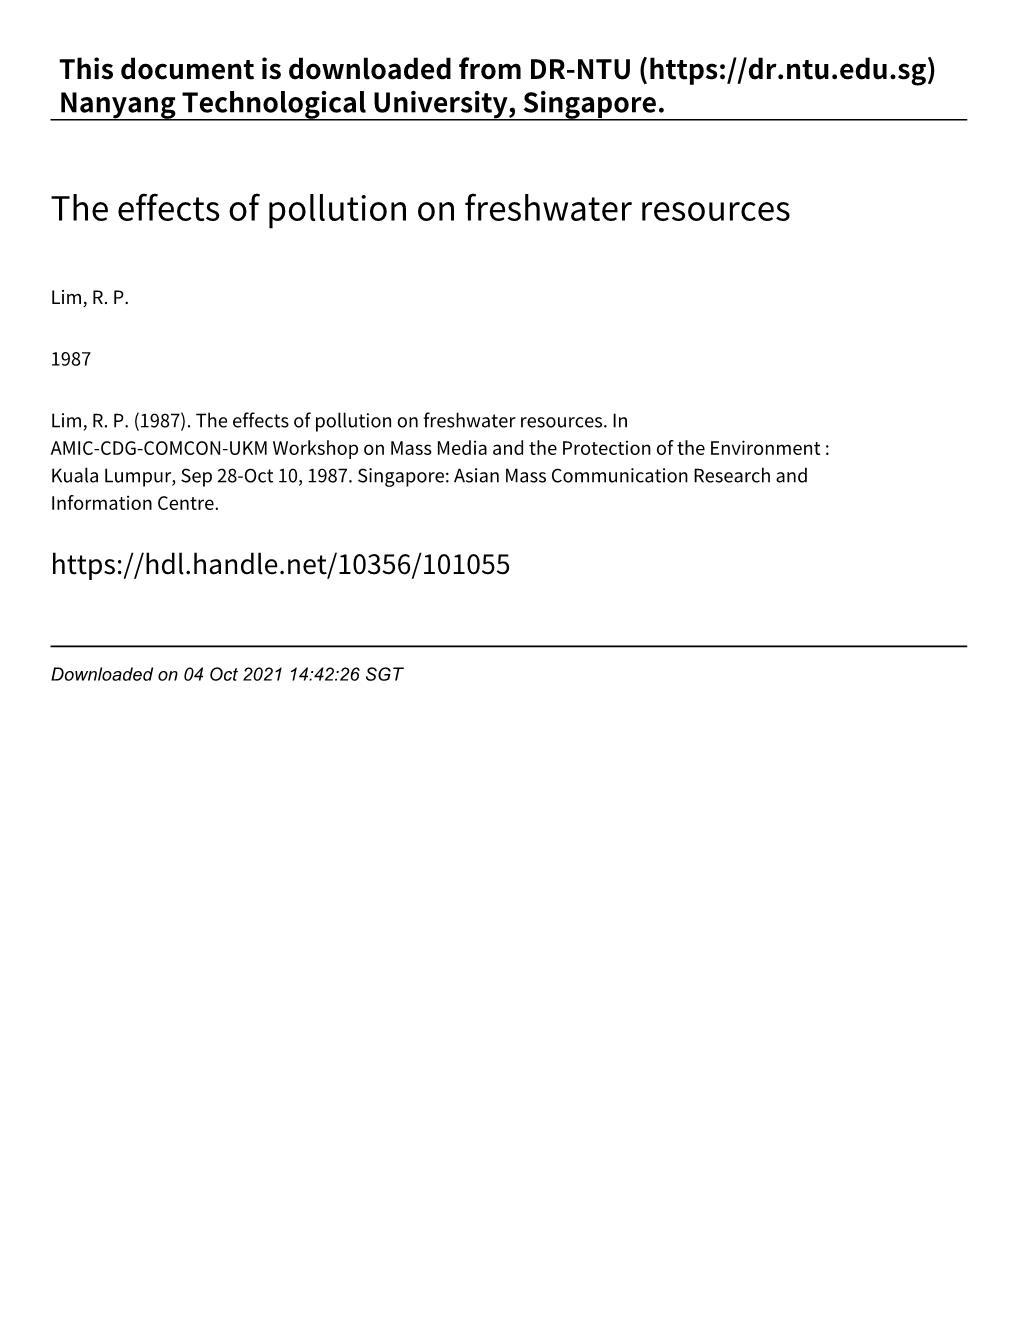 The Effects of Pollution on Freshwater Resources